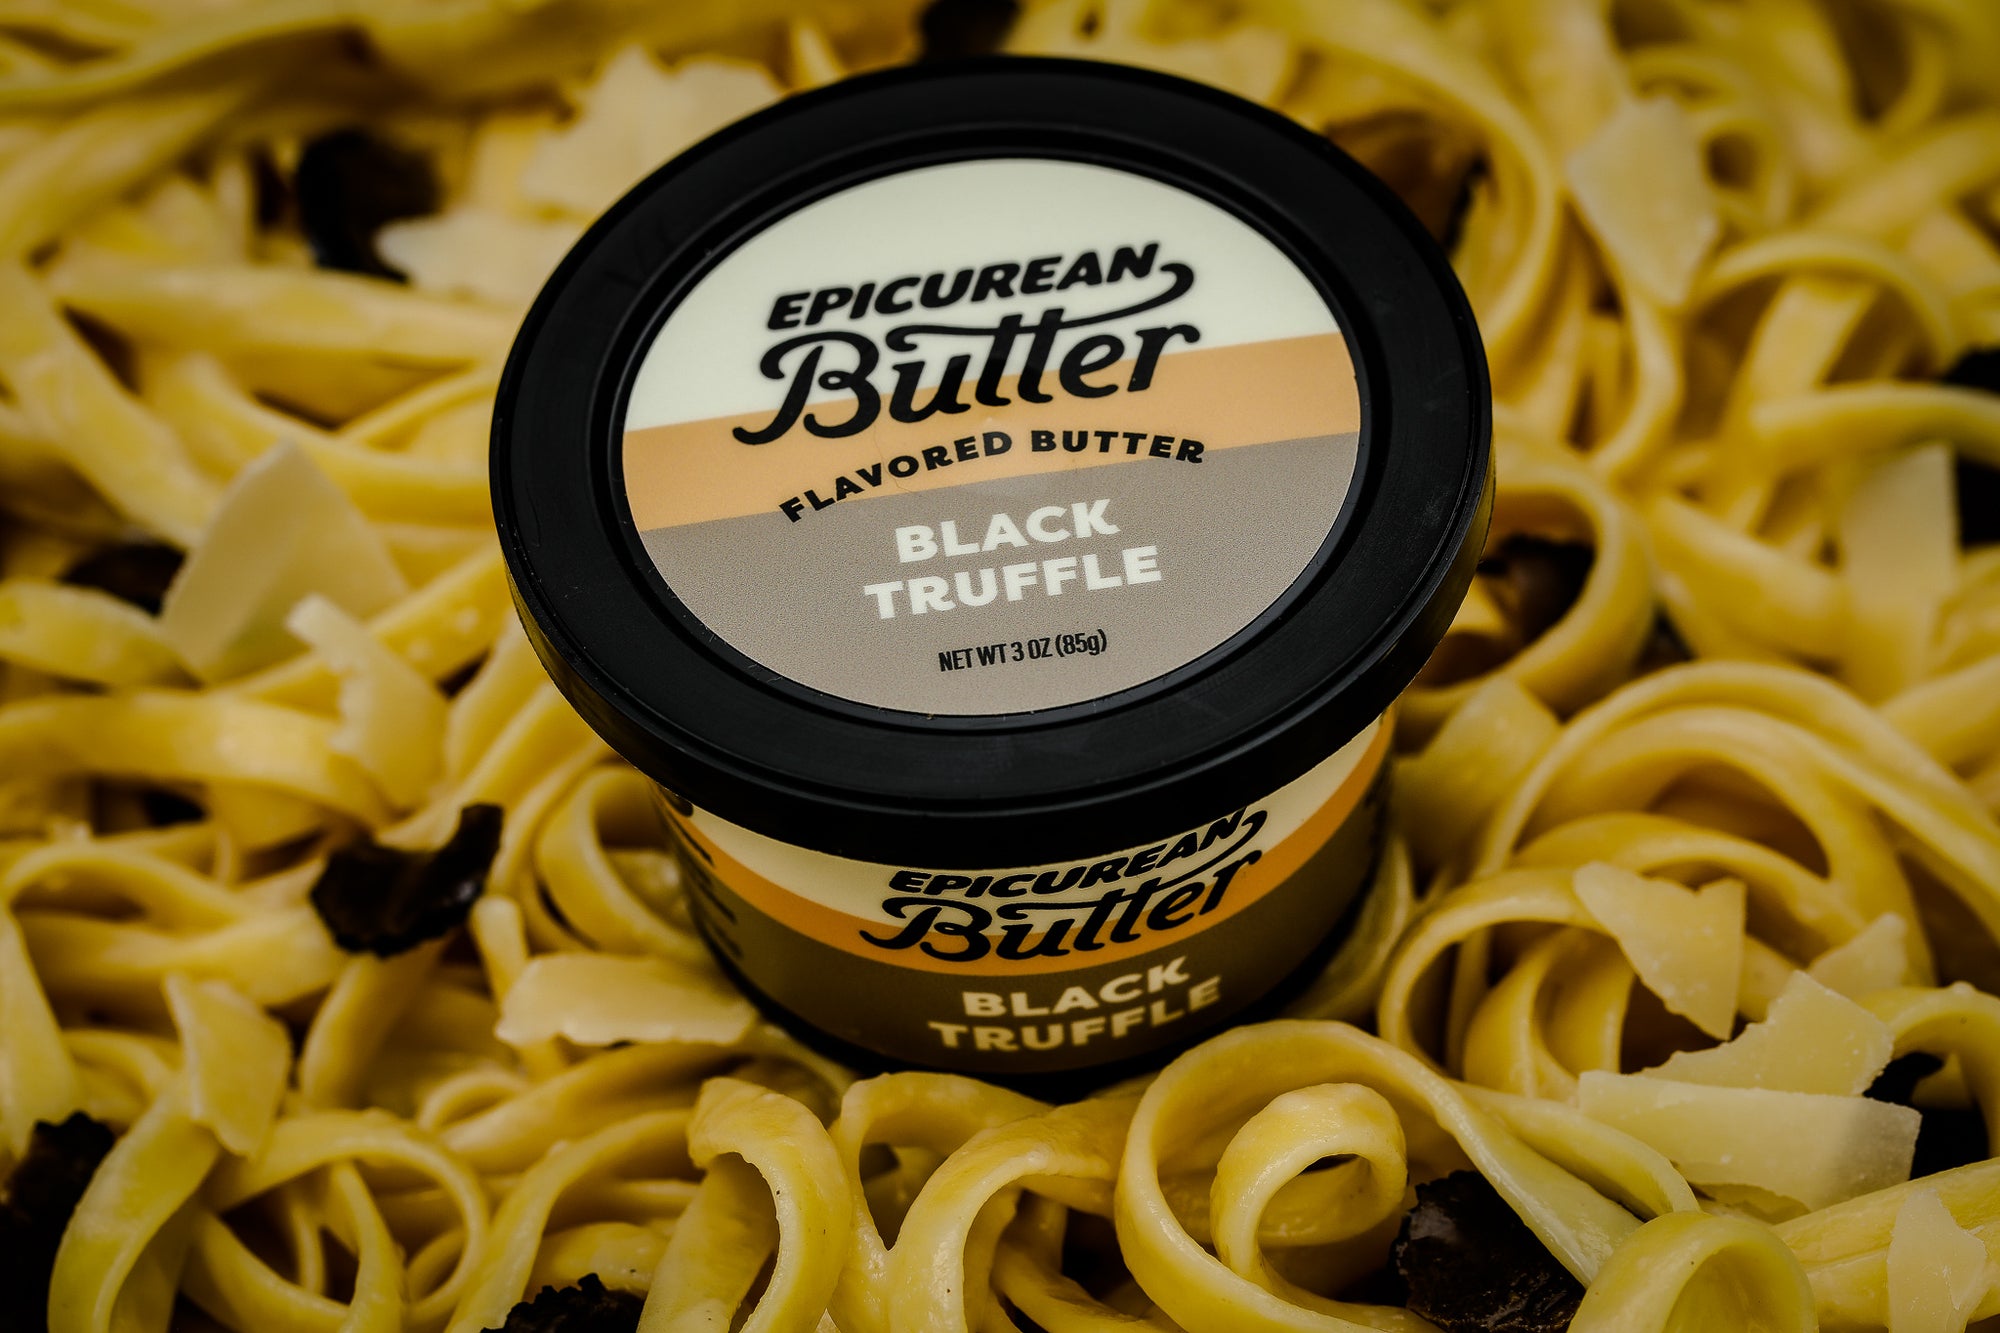 Epicurean Butter Black Truffle Flavored Butter with noodles and truffle pieces